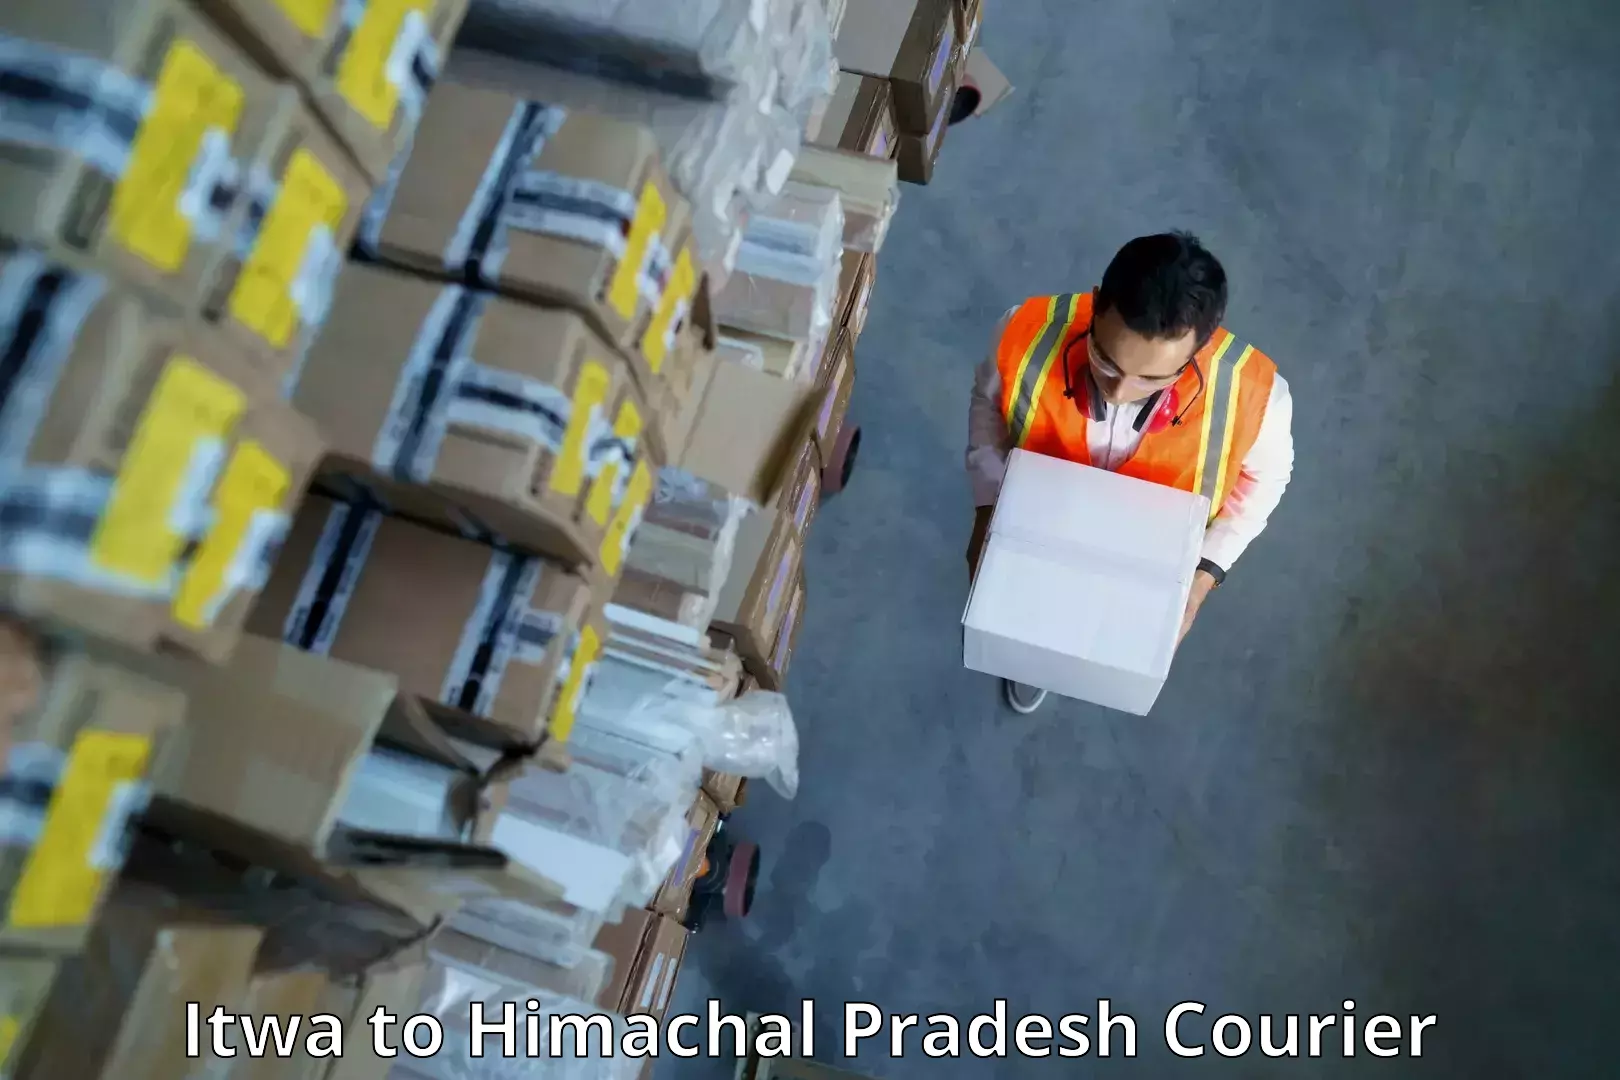 Pharmaceutical courier in Itwa to Keylong